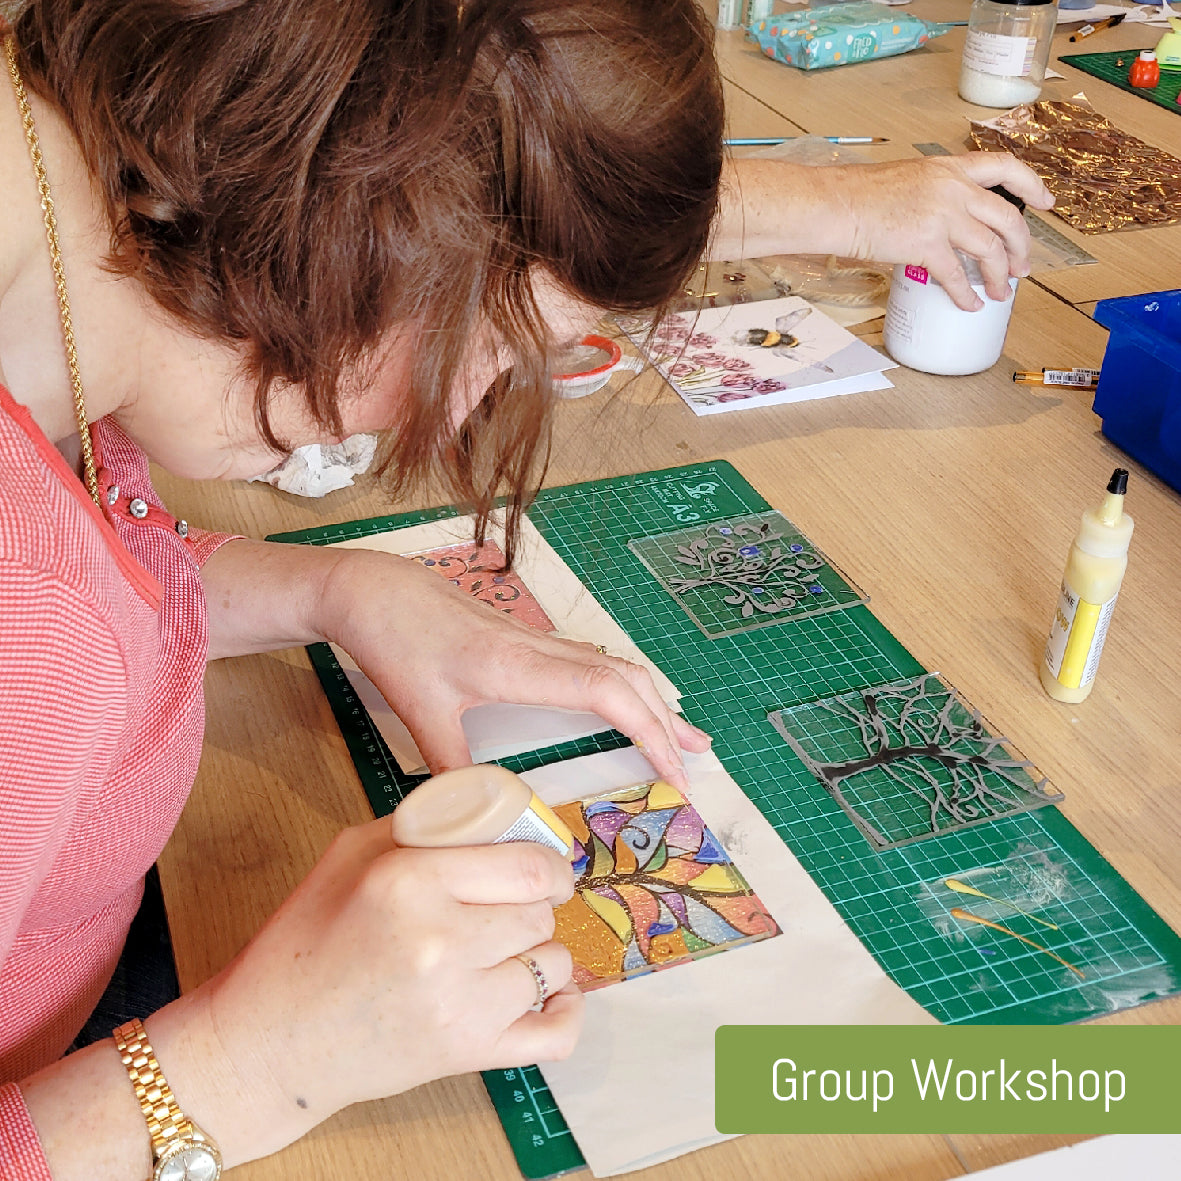 Customer creating fused glass in a group workshop